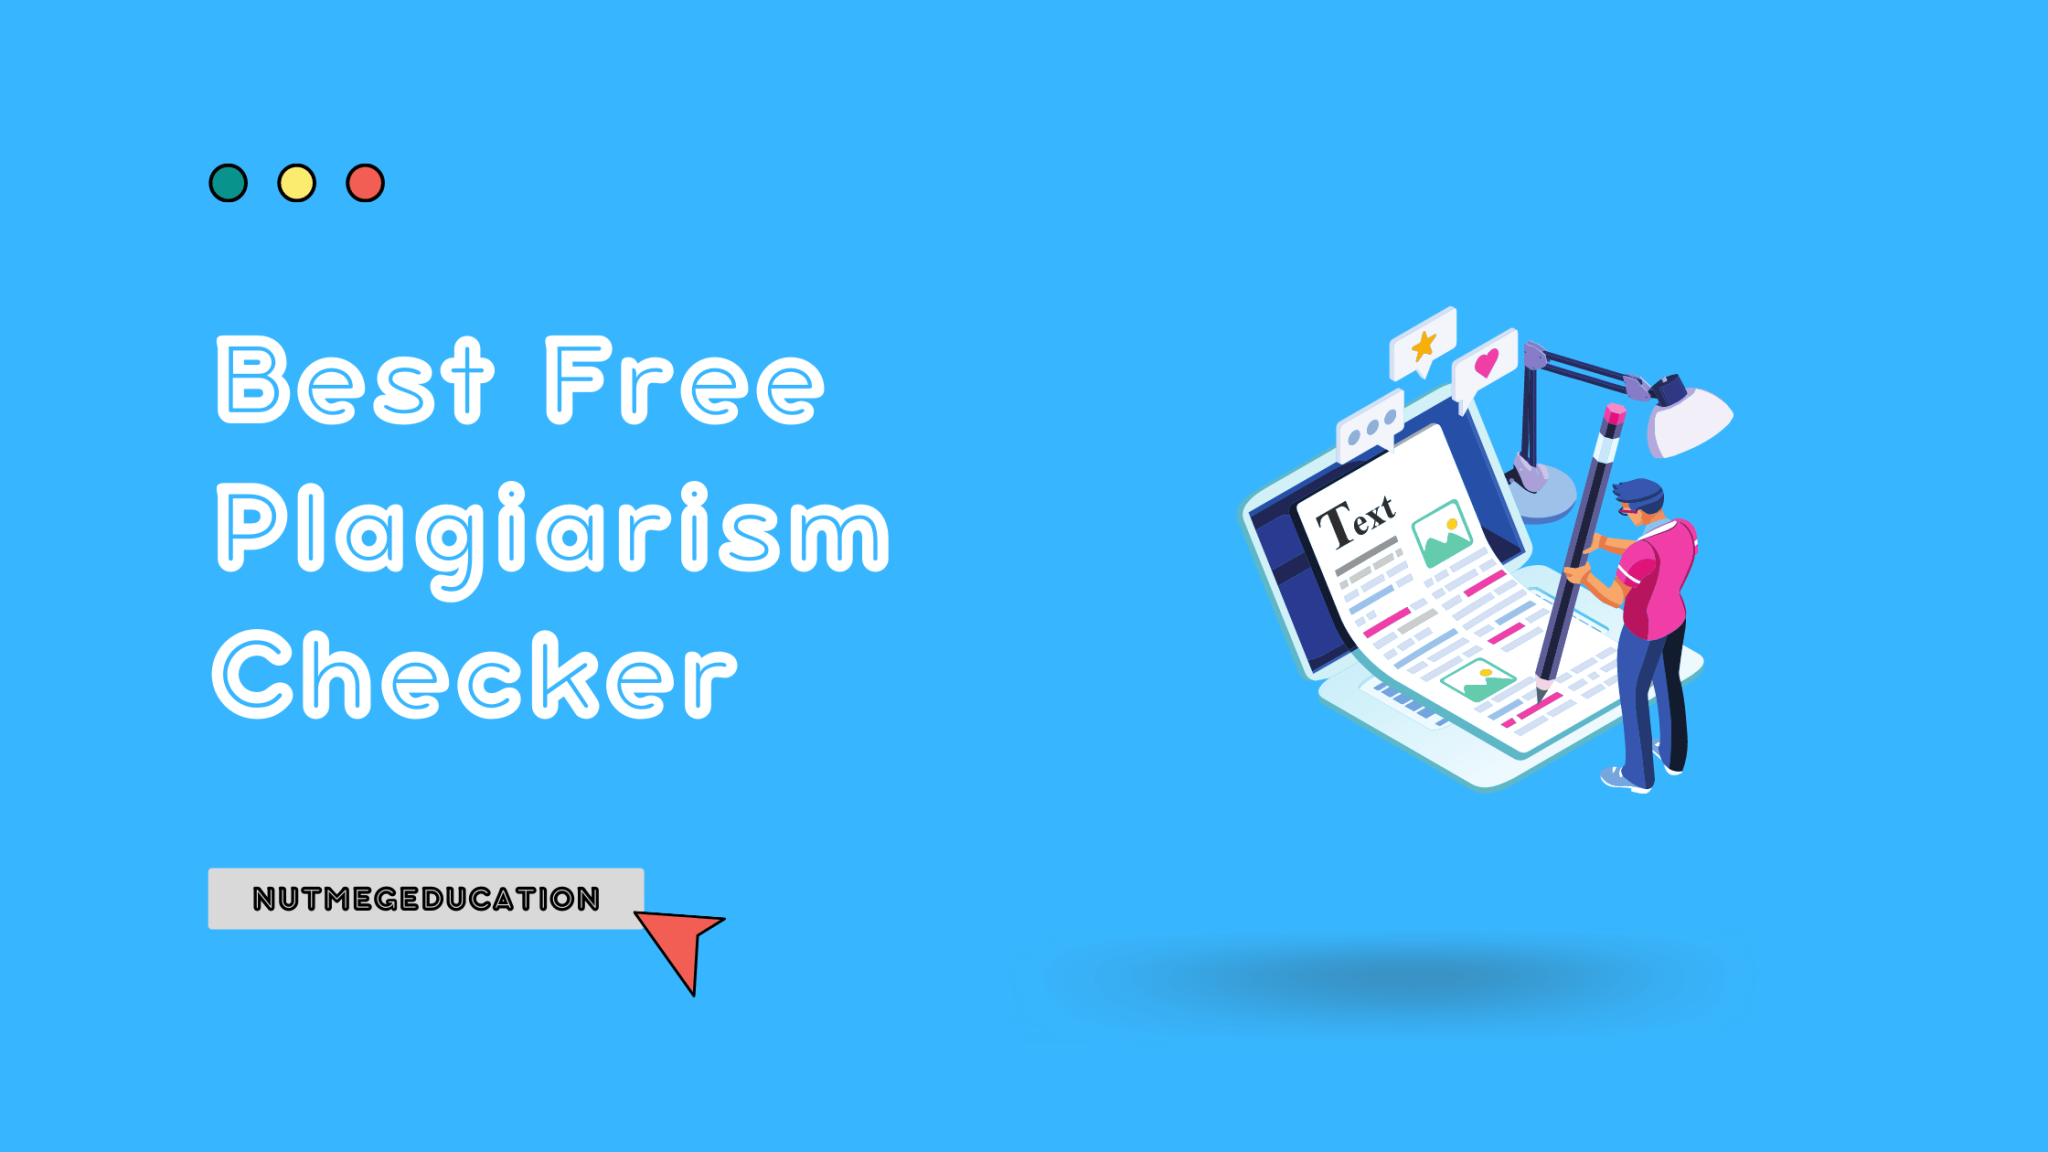 free plagiarism checker unlimited words